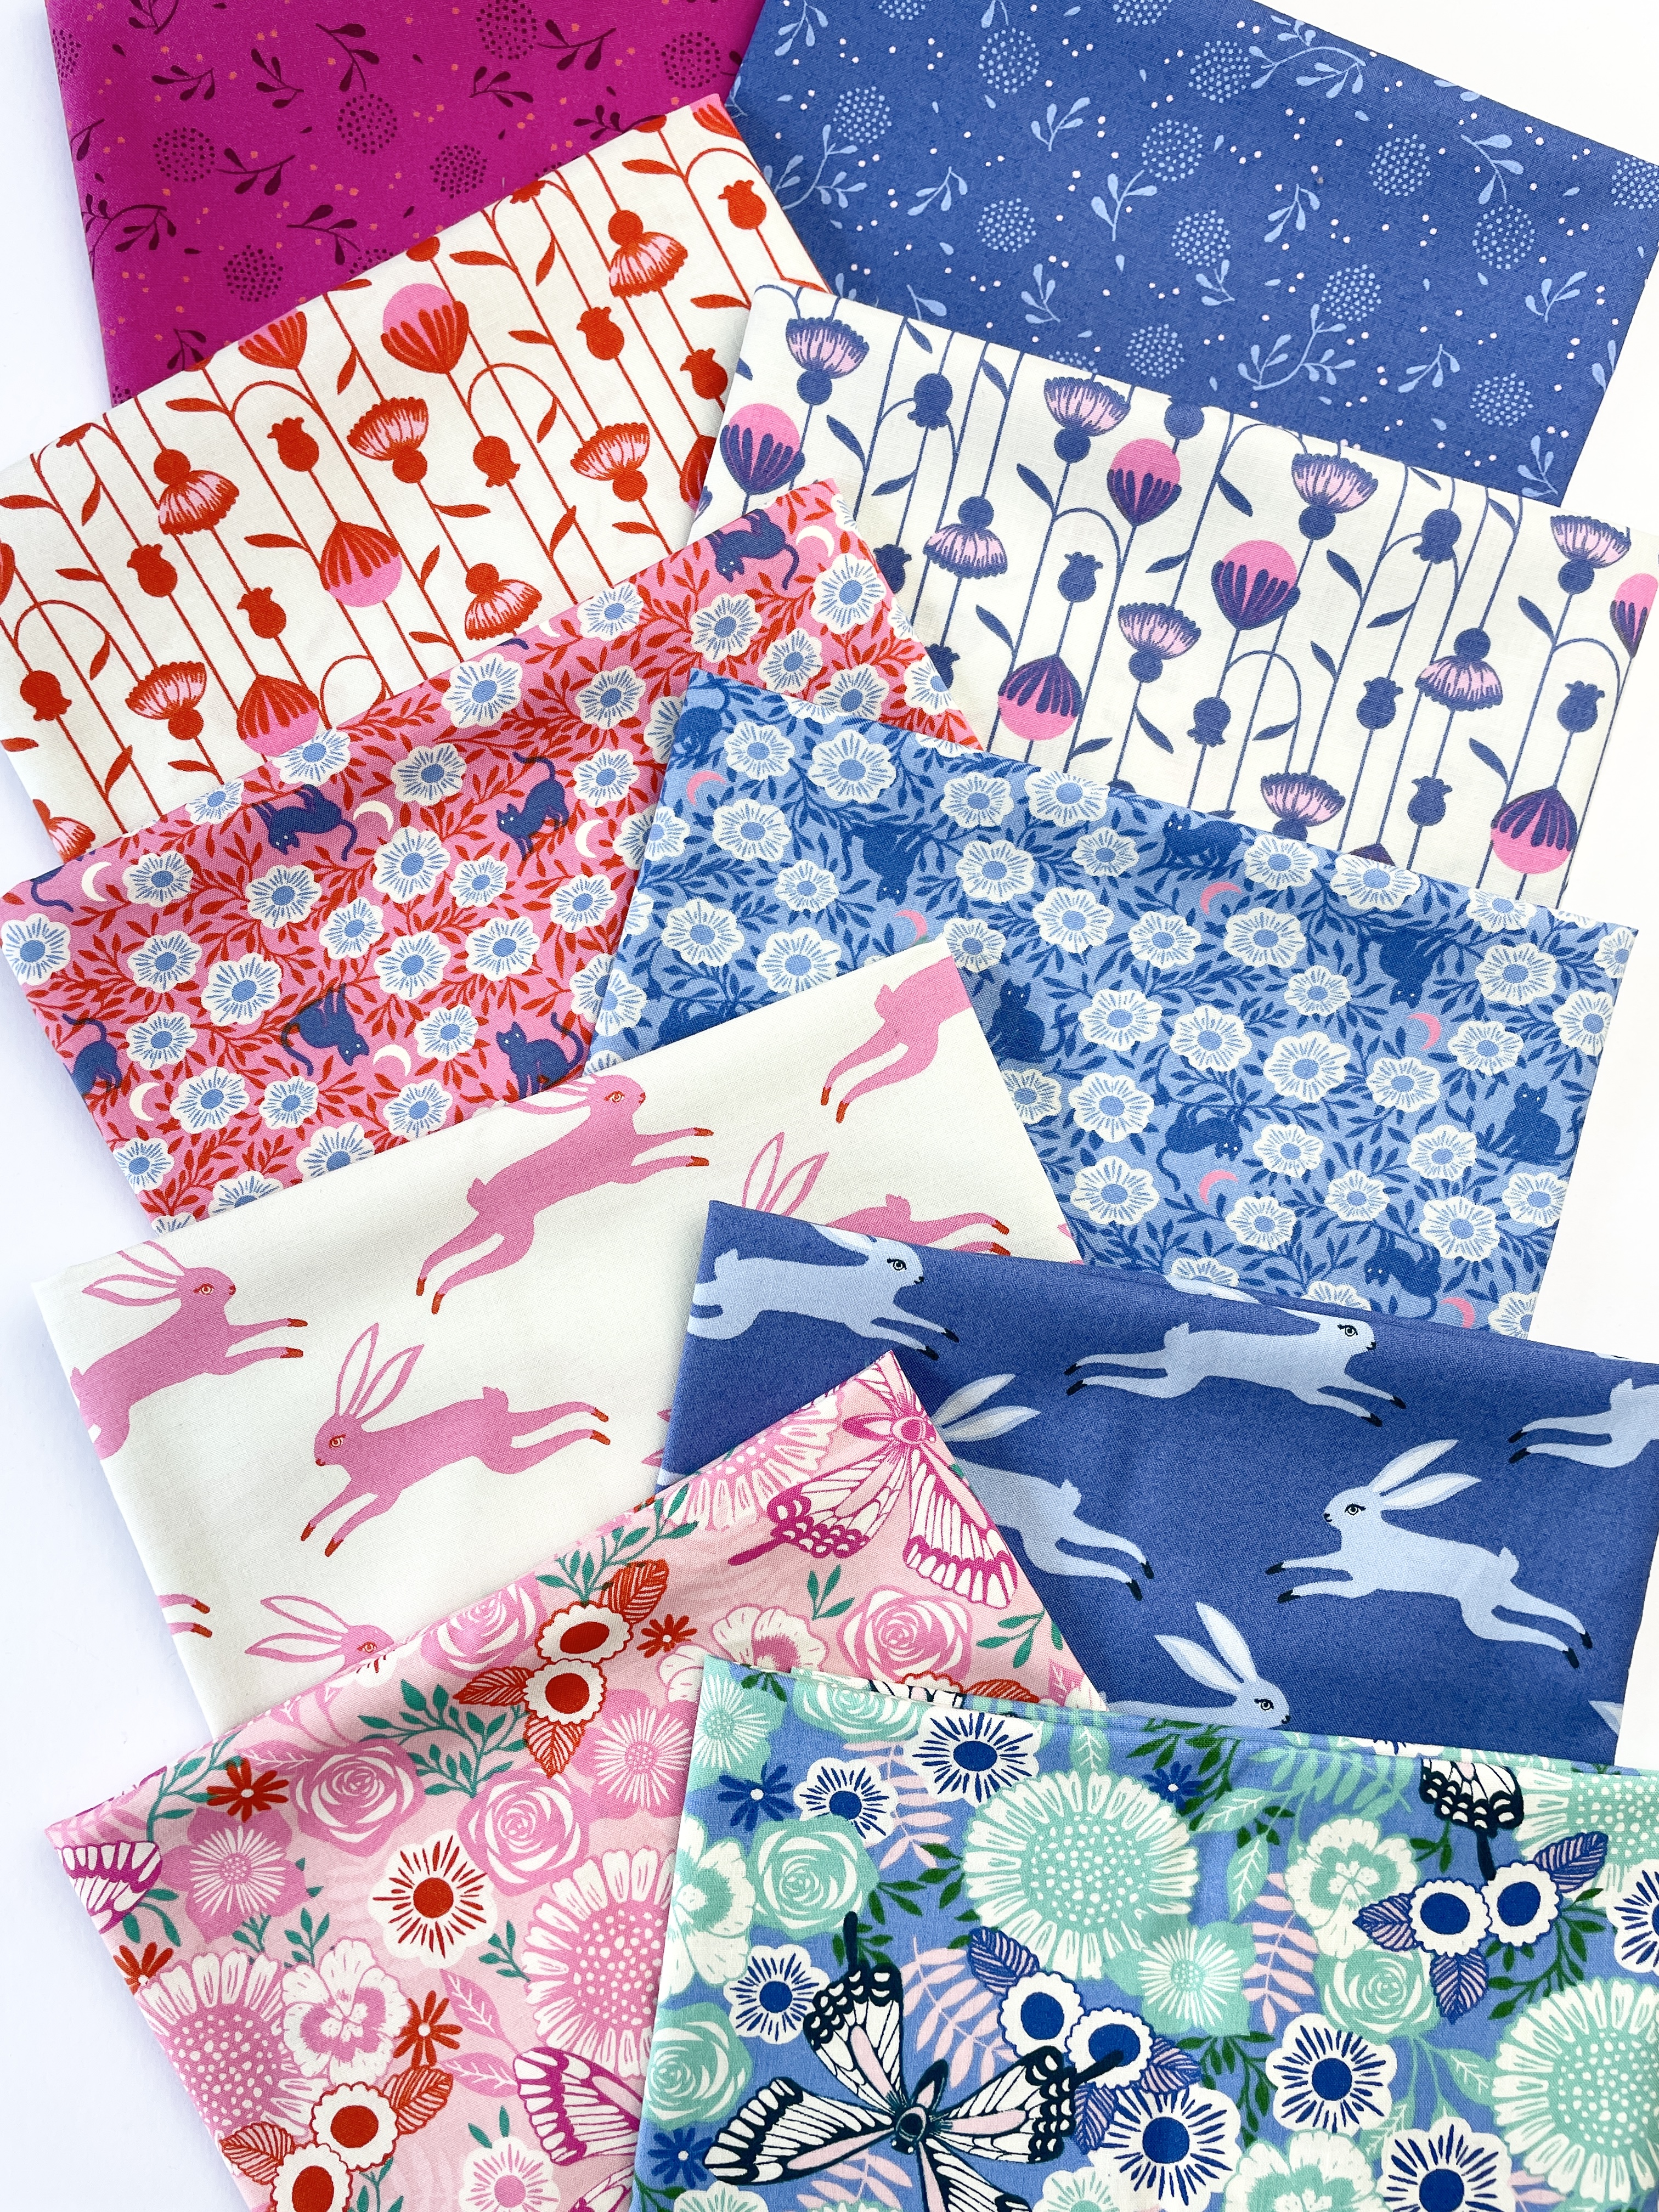 Modern patchwork and quilting fabric from the Backyard collection designed by Sarah Watts for Ruby Star Society